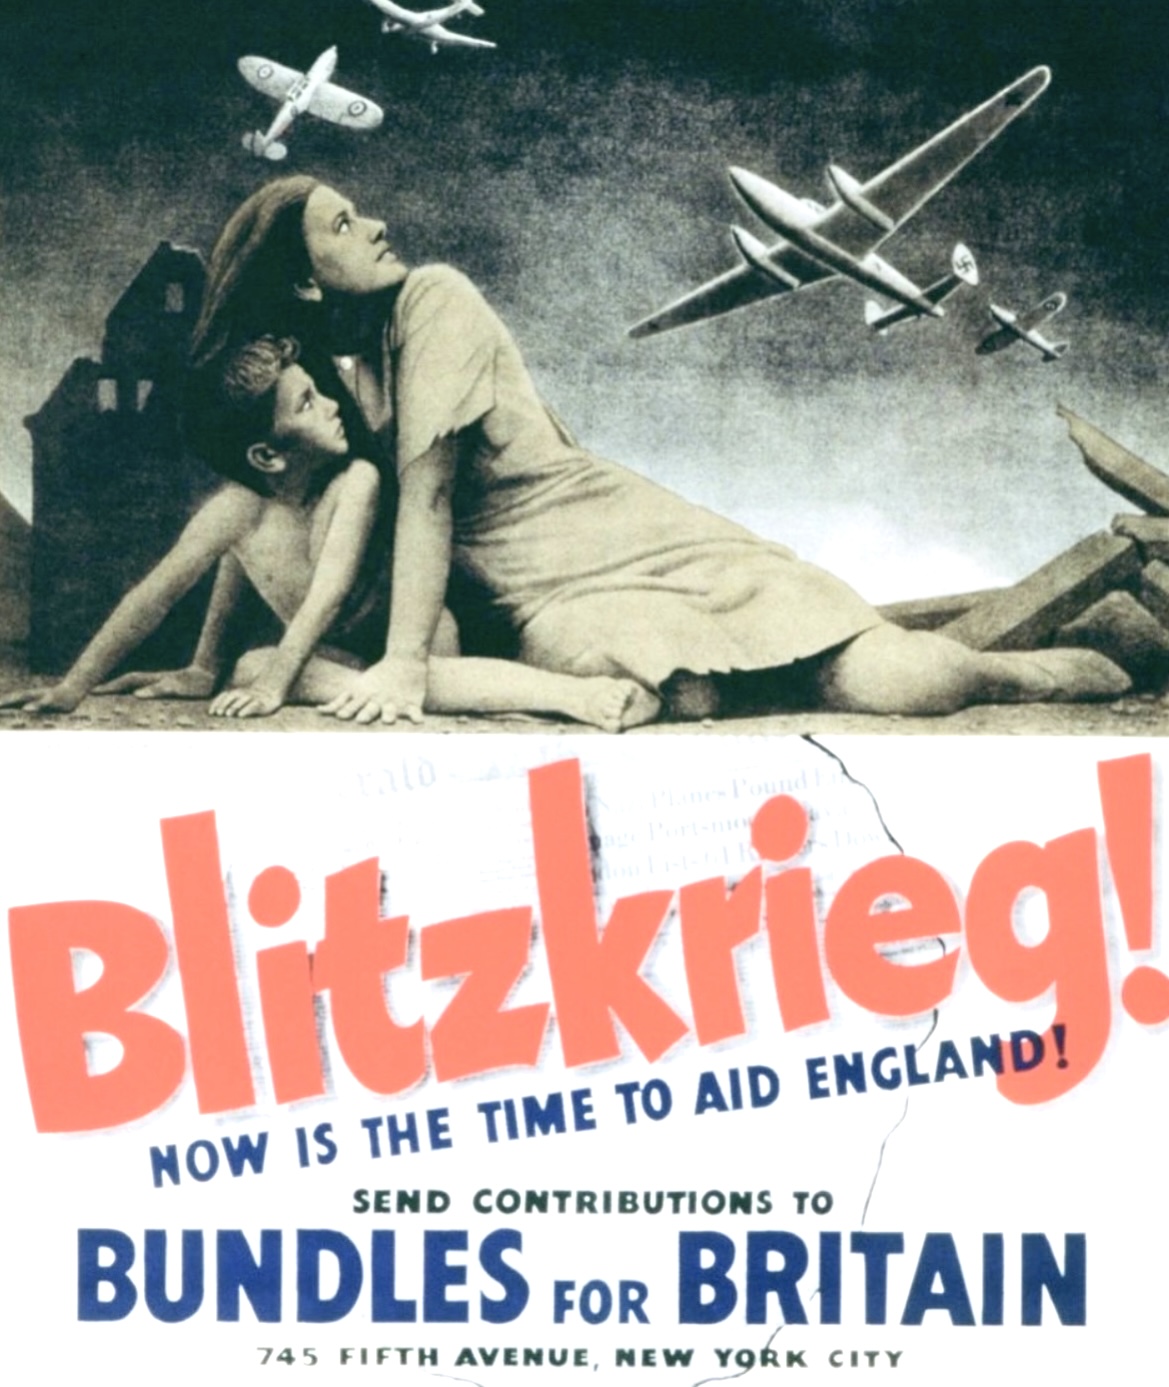 Blitzkrieg - Poster designed by Grant Wood to raise money
for British citizens during World War II